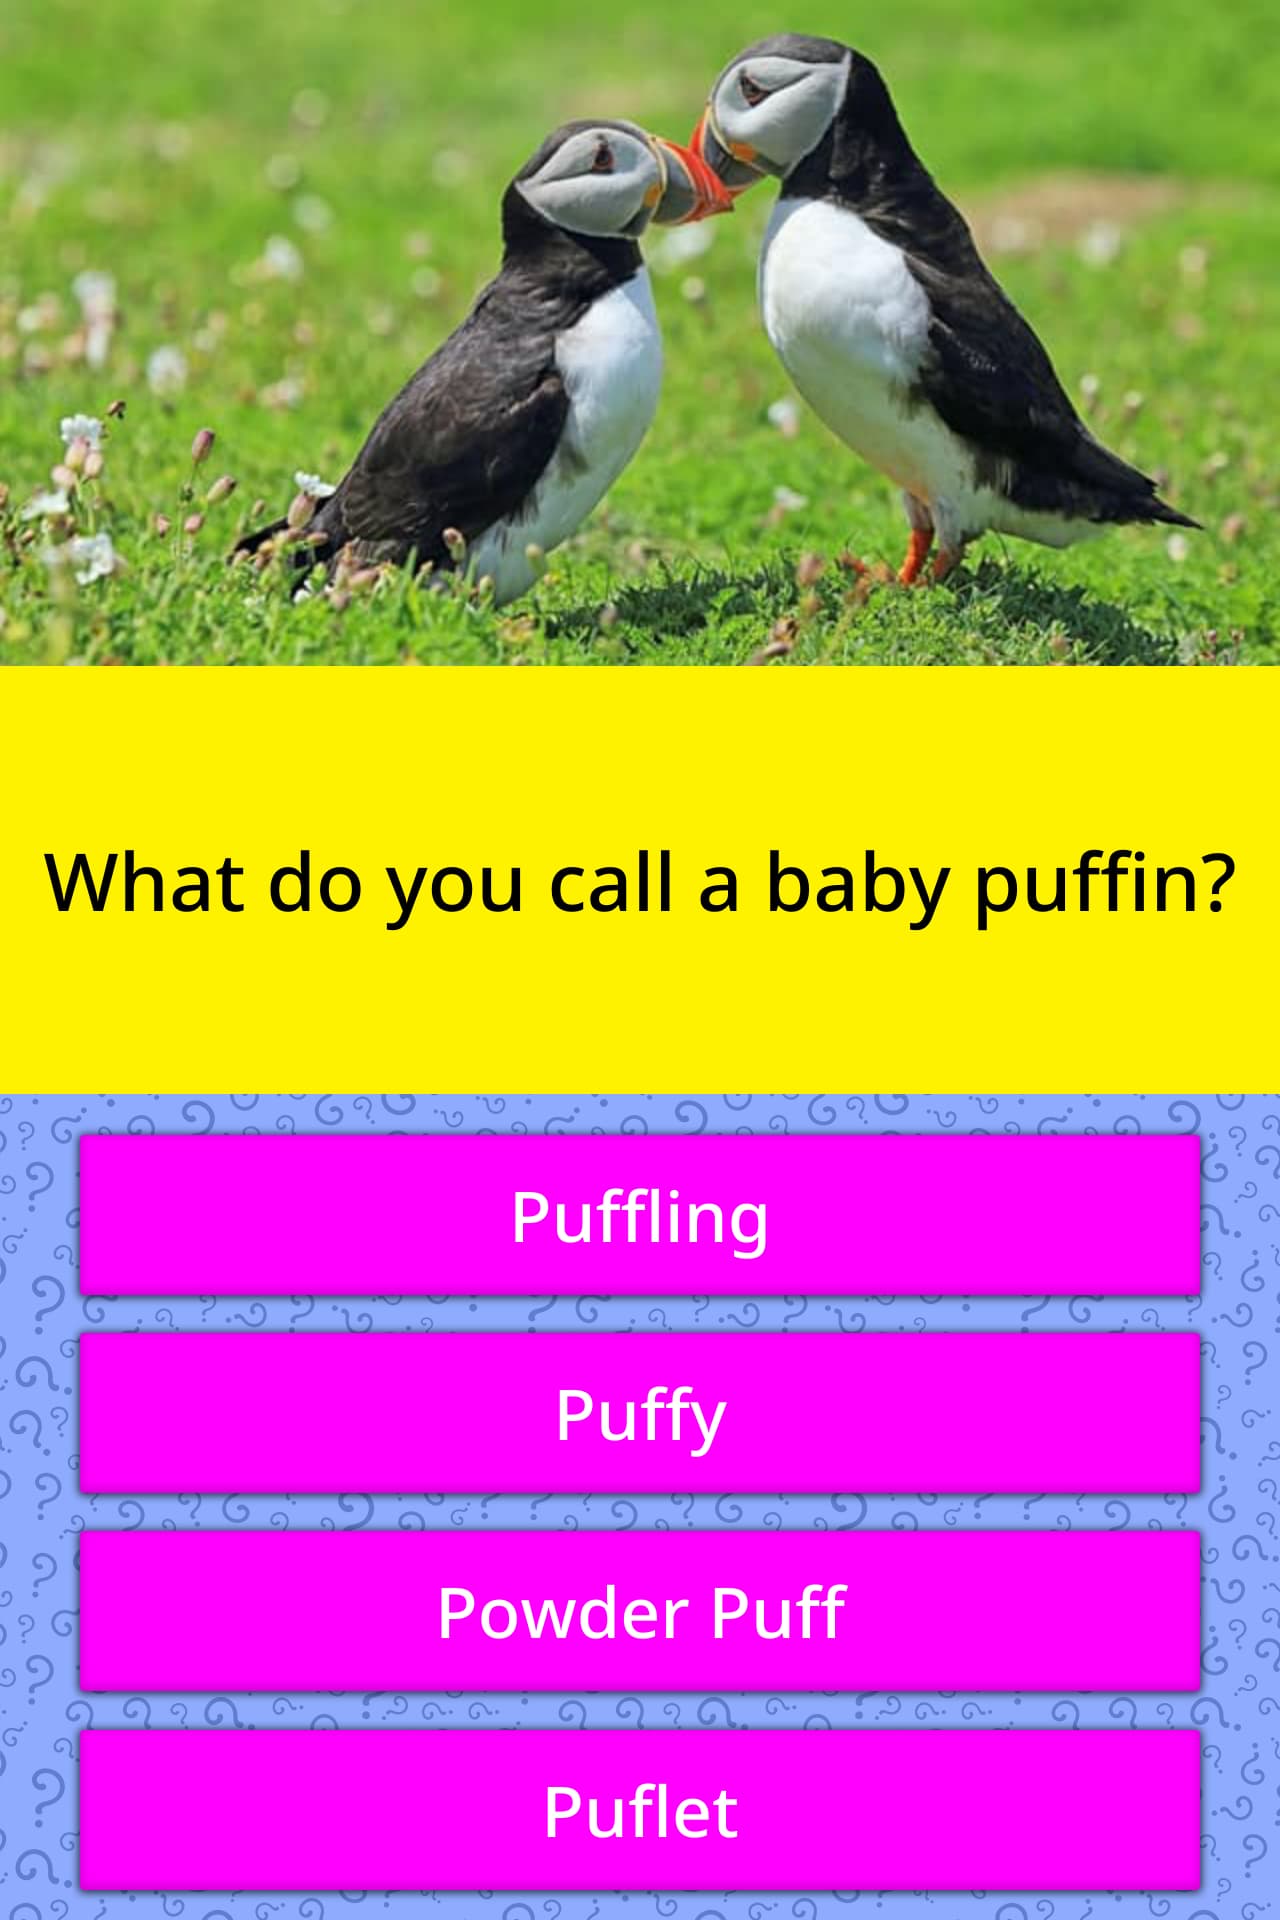 What Do You Call A Baby Puffin? | Trivia Answers | Quizzclub